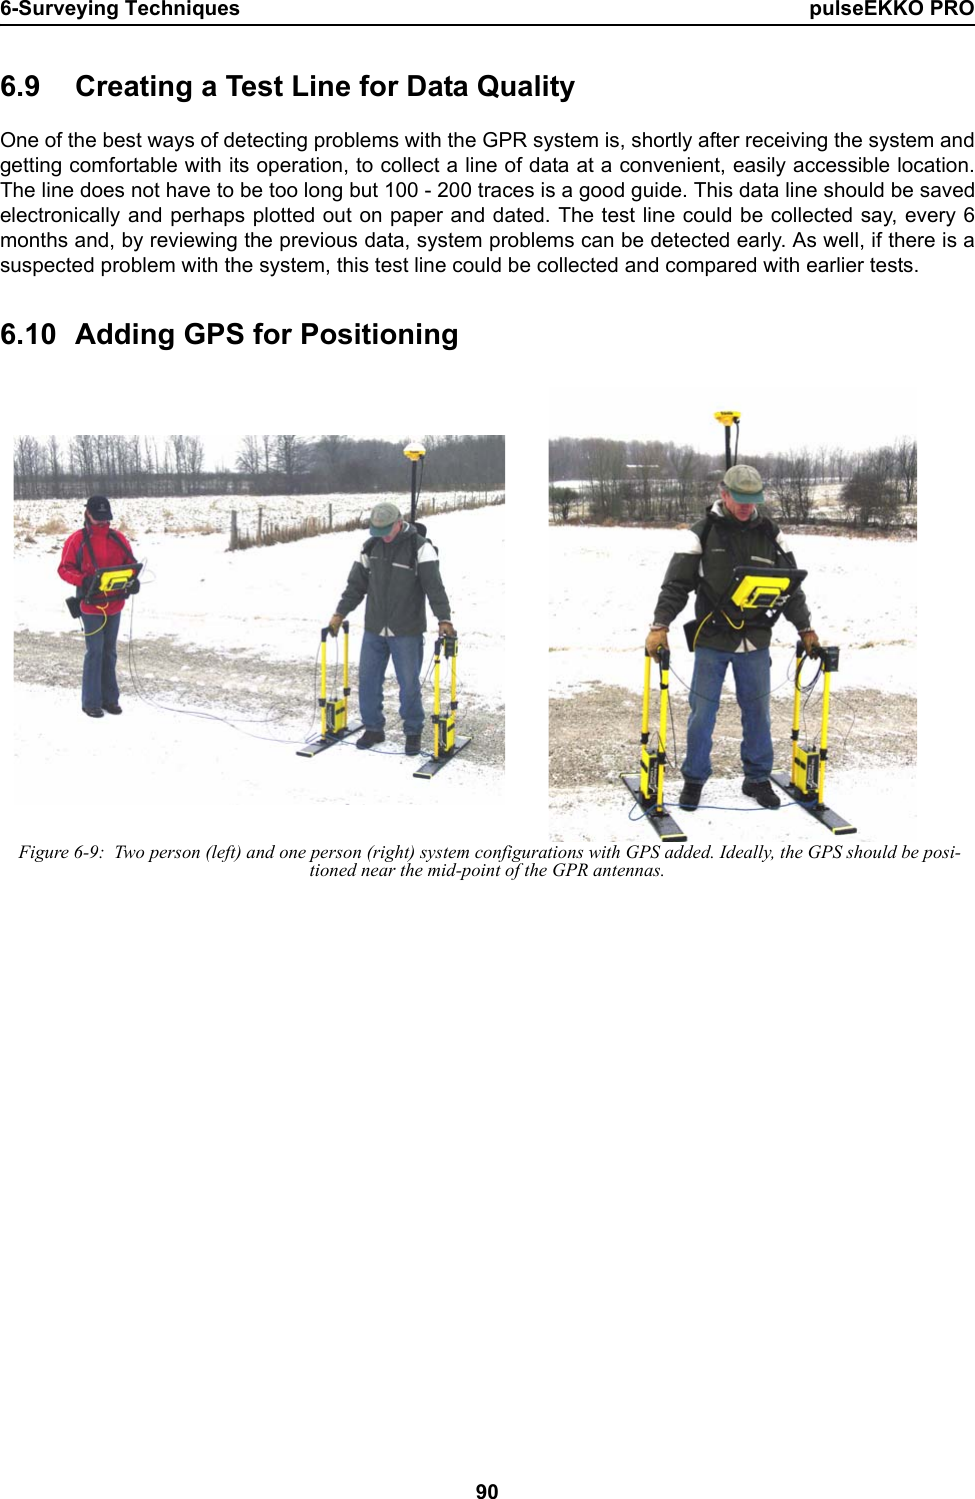 6-Surveying Techniques pulseEKKO PRO906.9 Creating a Test Line for Data QualityOne of the best ways of detecting problems with the GPR system is, shortly after receiving the system andgetting comfortable with its operation, to collect a line of data at a convenient, easily accessible location.The line does not have to be too long but 100 - 200 traces is a good guide. This data line should be savedelectronically and perhaps plotted out on paper and dated. The test line could be collected say, every 6months and, by reviewing the previous data, system problems can be detected early. As well, if there is asuspected problem with the system, this test line could be collected and compared with earlier tests. 6.10 Adding GPS for Positioning Figure 6-9:  Two person (left) and one person (right) system configurations with GPS added. Ideally, the GPS should be posi-tioned near the mid-point of the GPR antennas.